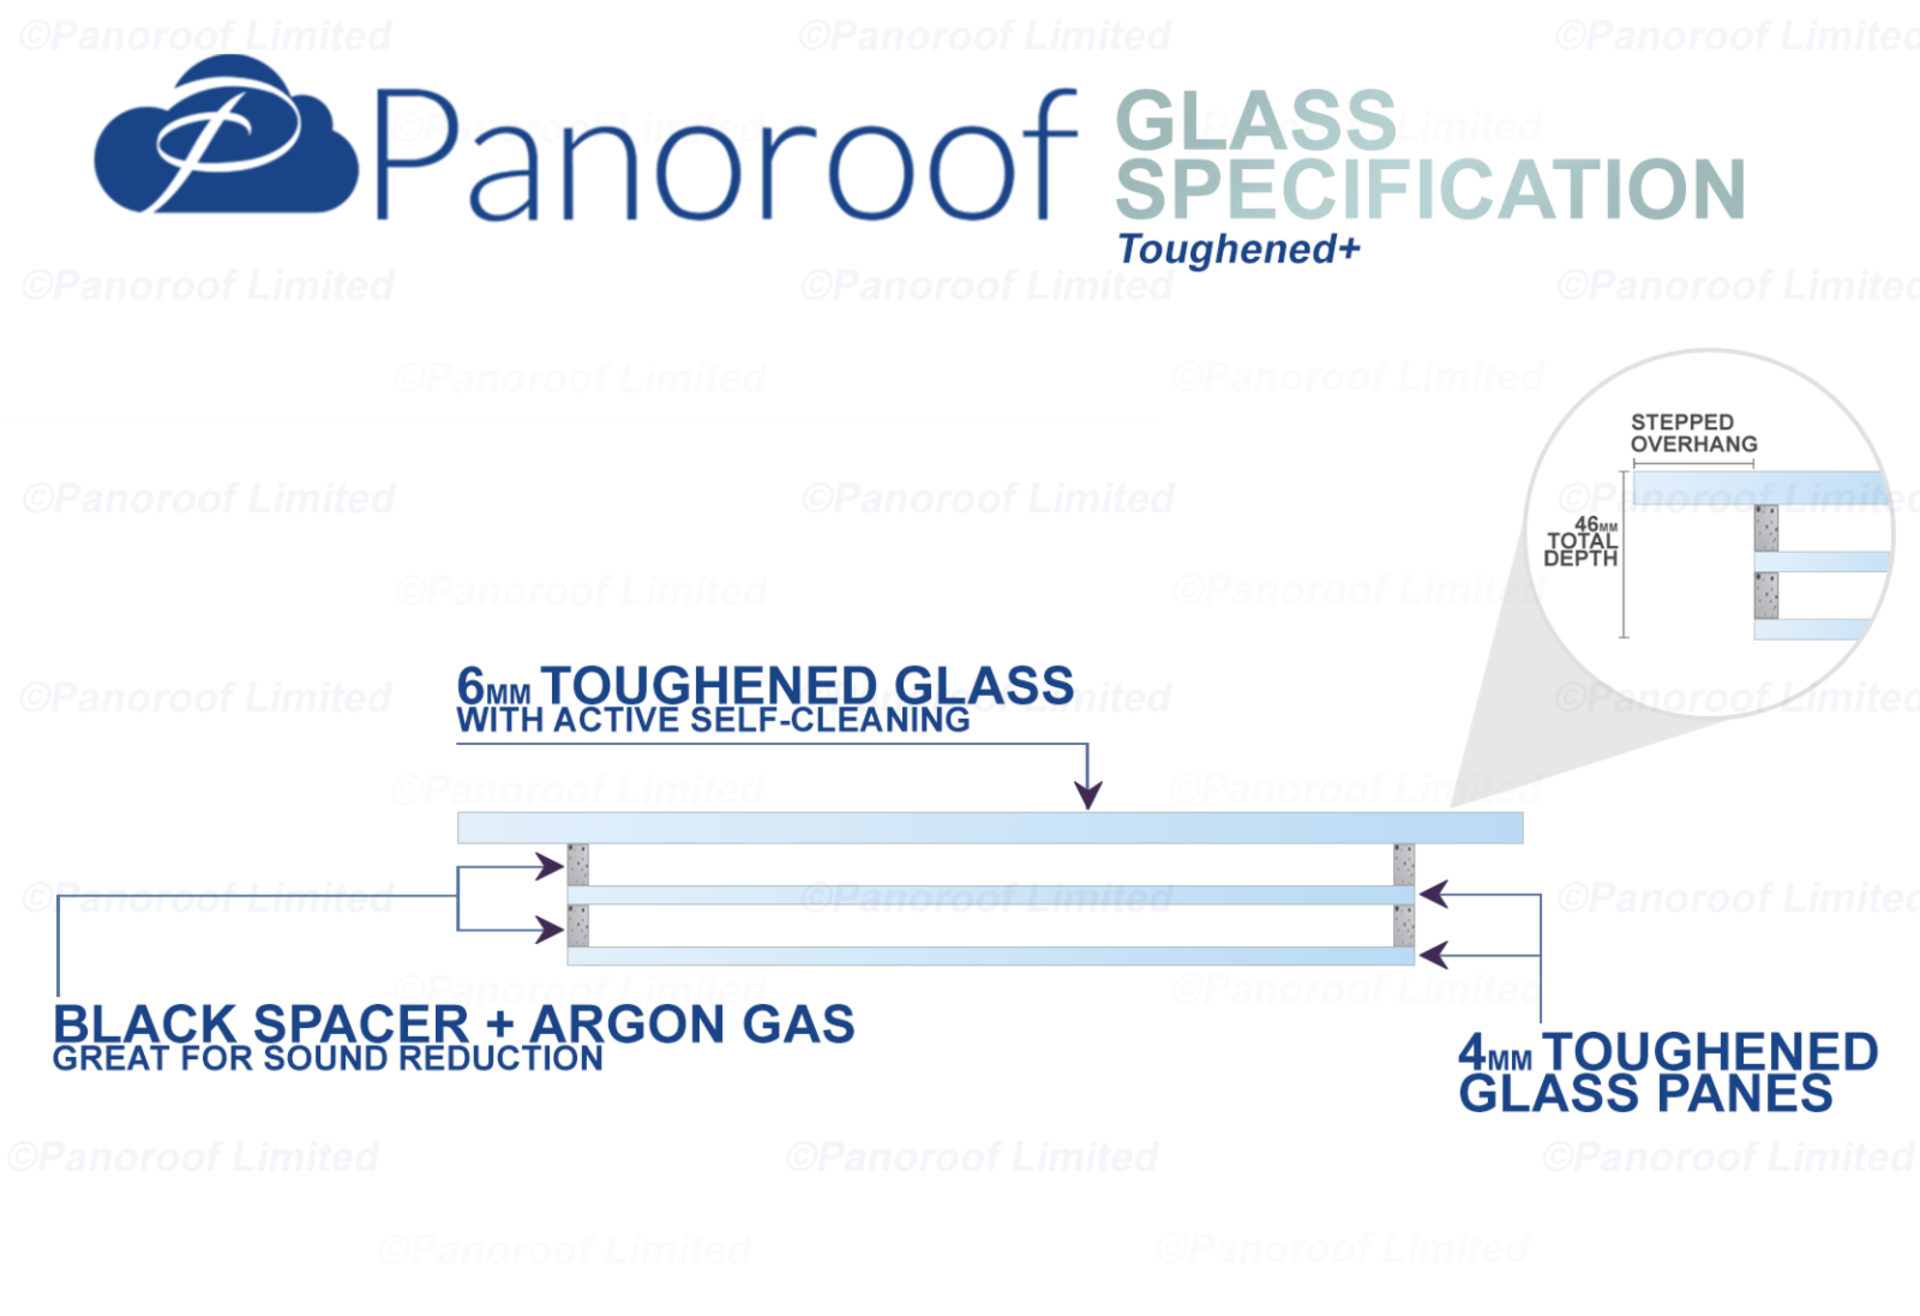 """Panoroof Triple Glazed Self Cleaning 800x800mm (inside Size Visable glass area) Seamless Glass - Image 4 of 6